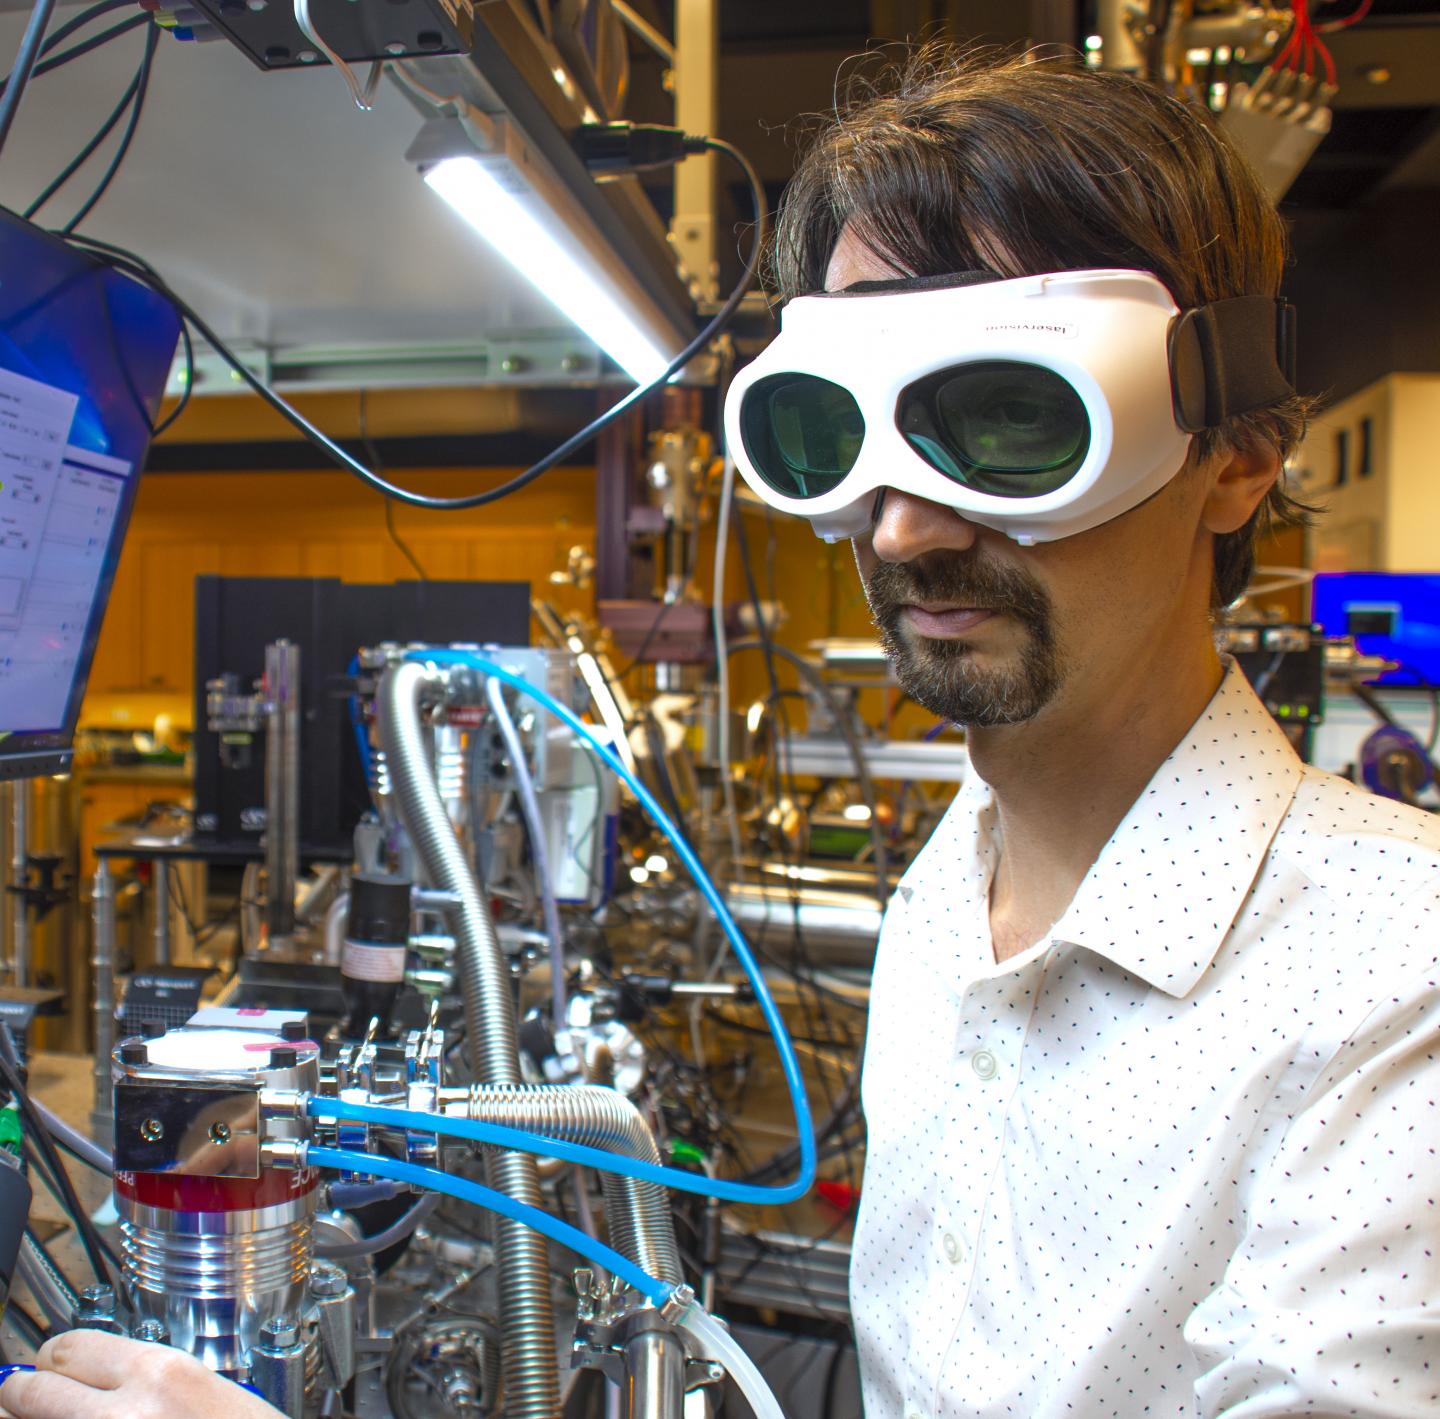 Scientist in the Femtosecond Spectroscopy Unit at OIST Adjusts Laser Settings